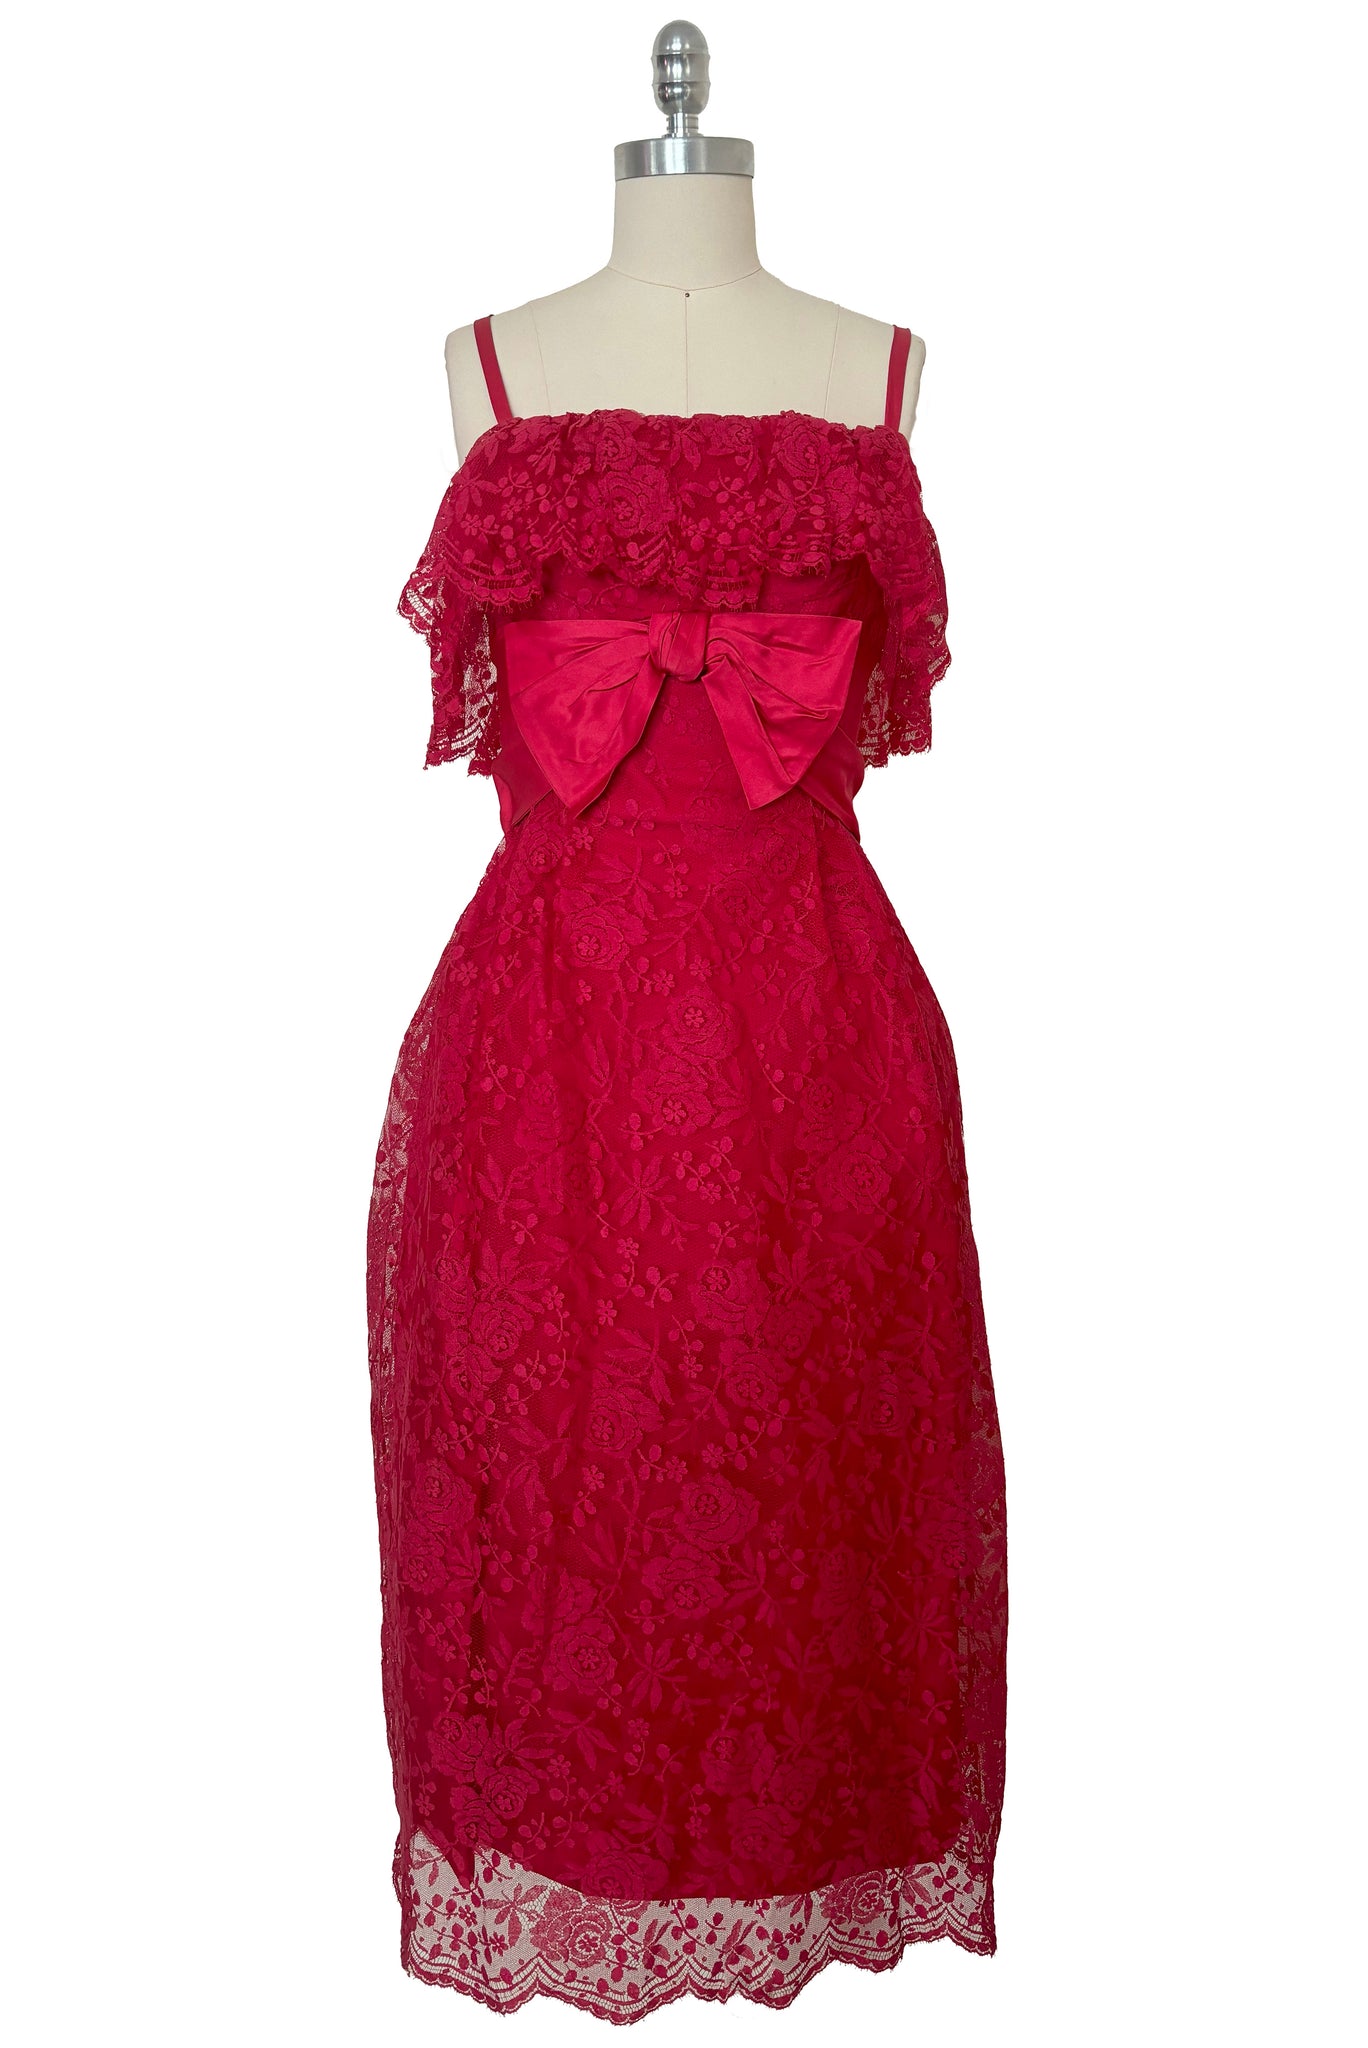 1960s Vintage Red Satin and Lace Cocktail Dress by Miss America, Extra Extra Small to Extra Small